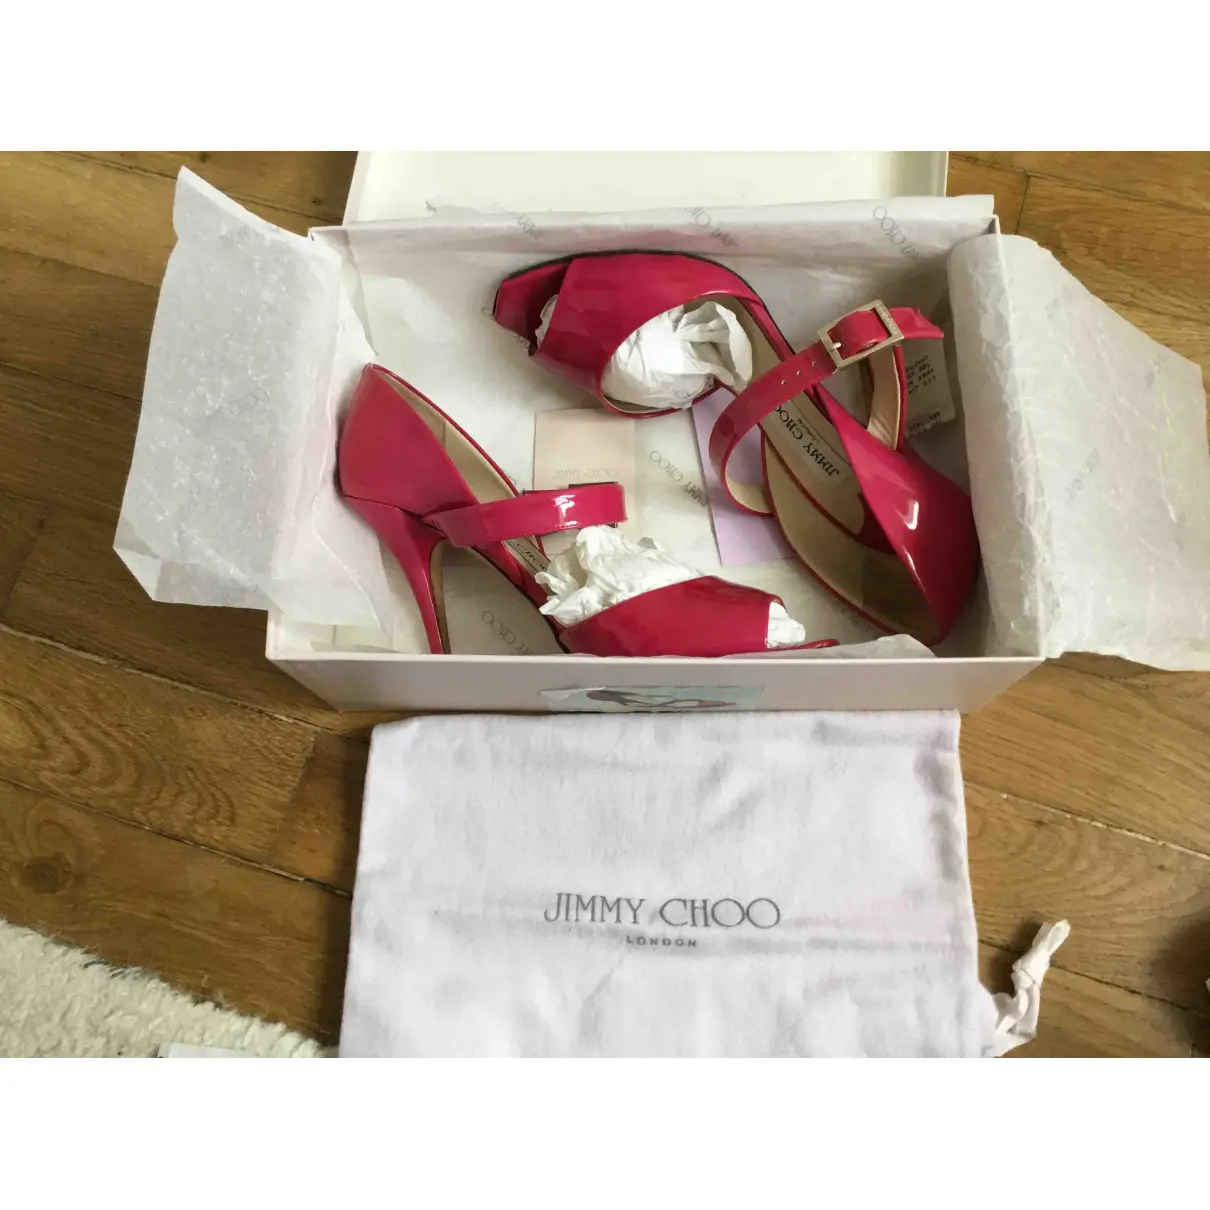 Patent leather sandals Jimmy Choo